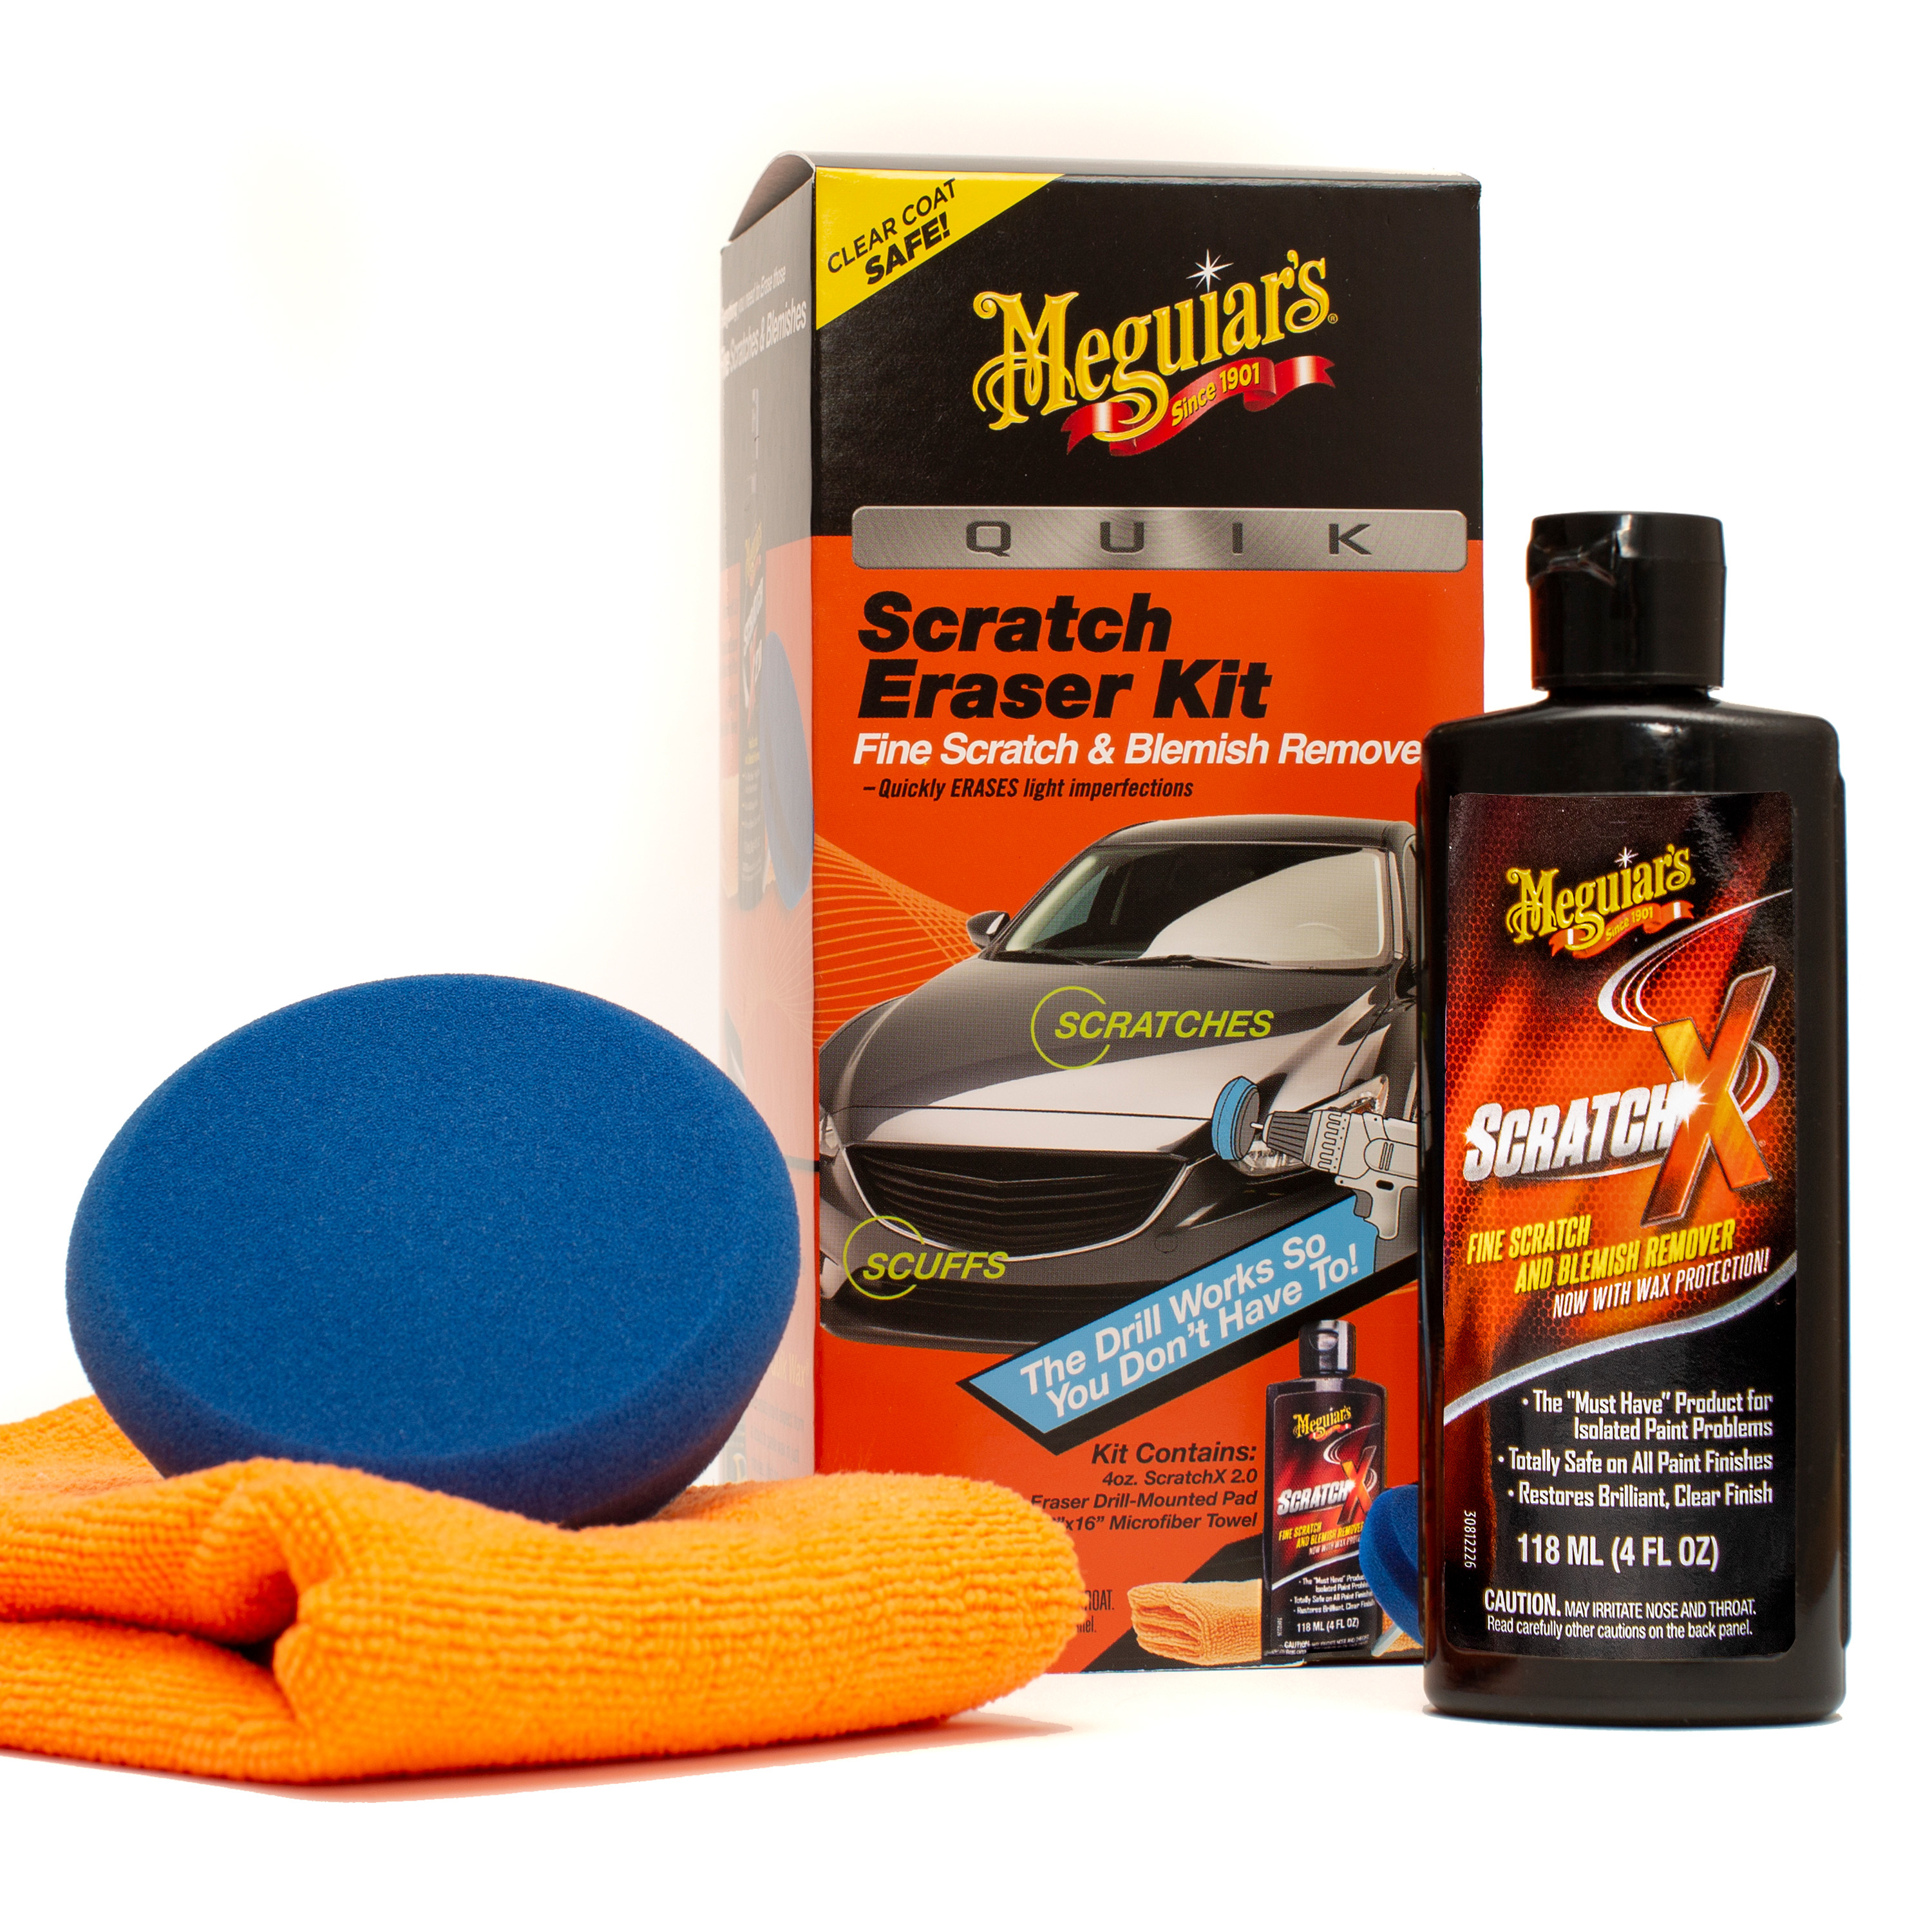 Meguiar's Quik Scratch Eraser Kit, Car Care Kit with ScratchX, Drill-Mounted Pad, and Microfiber Towel, Multi-color - image 1 of 9